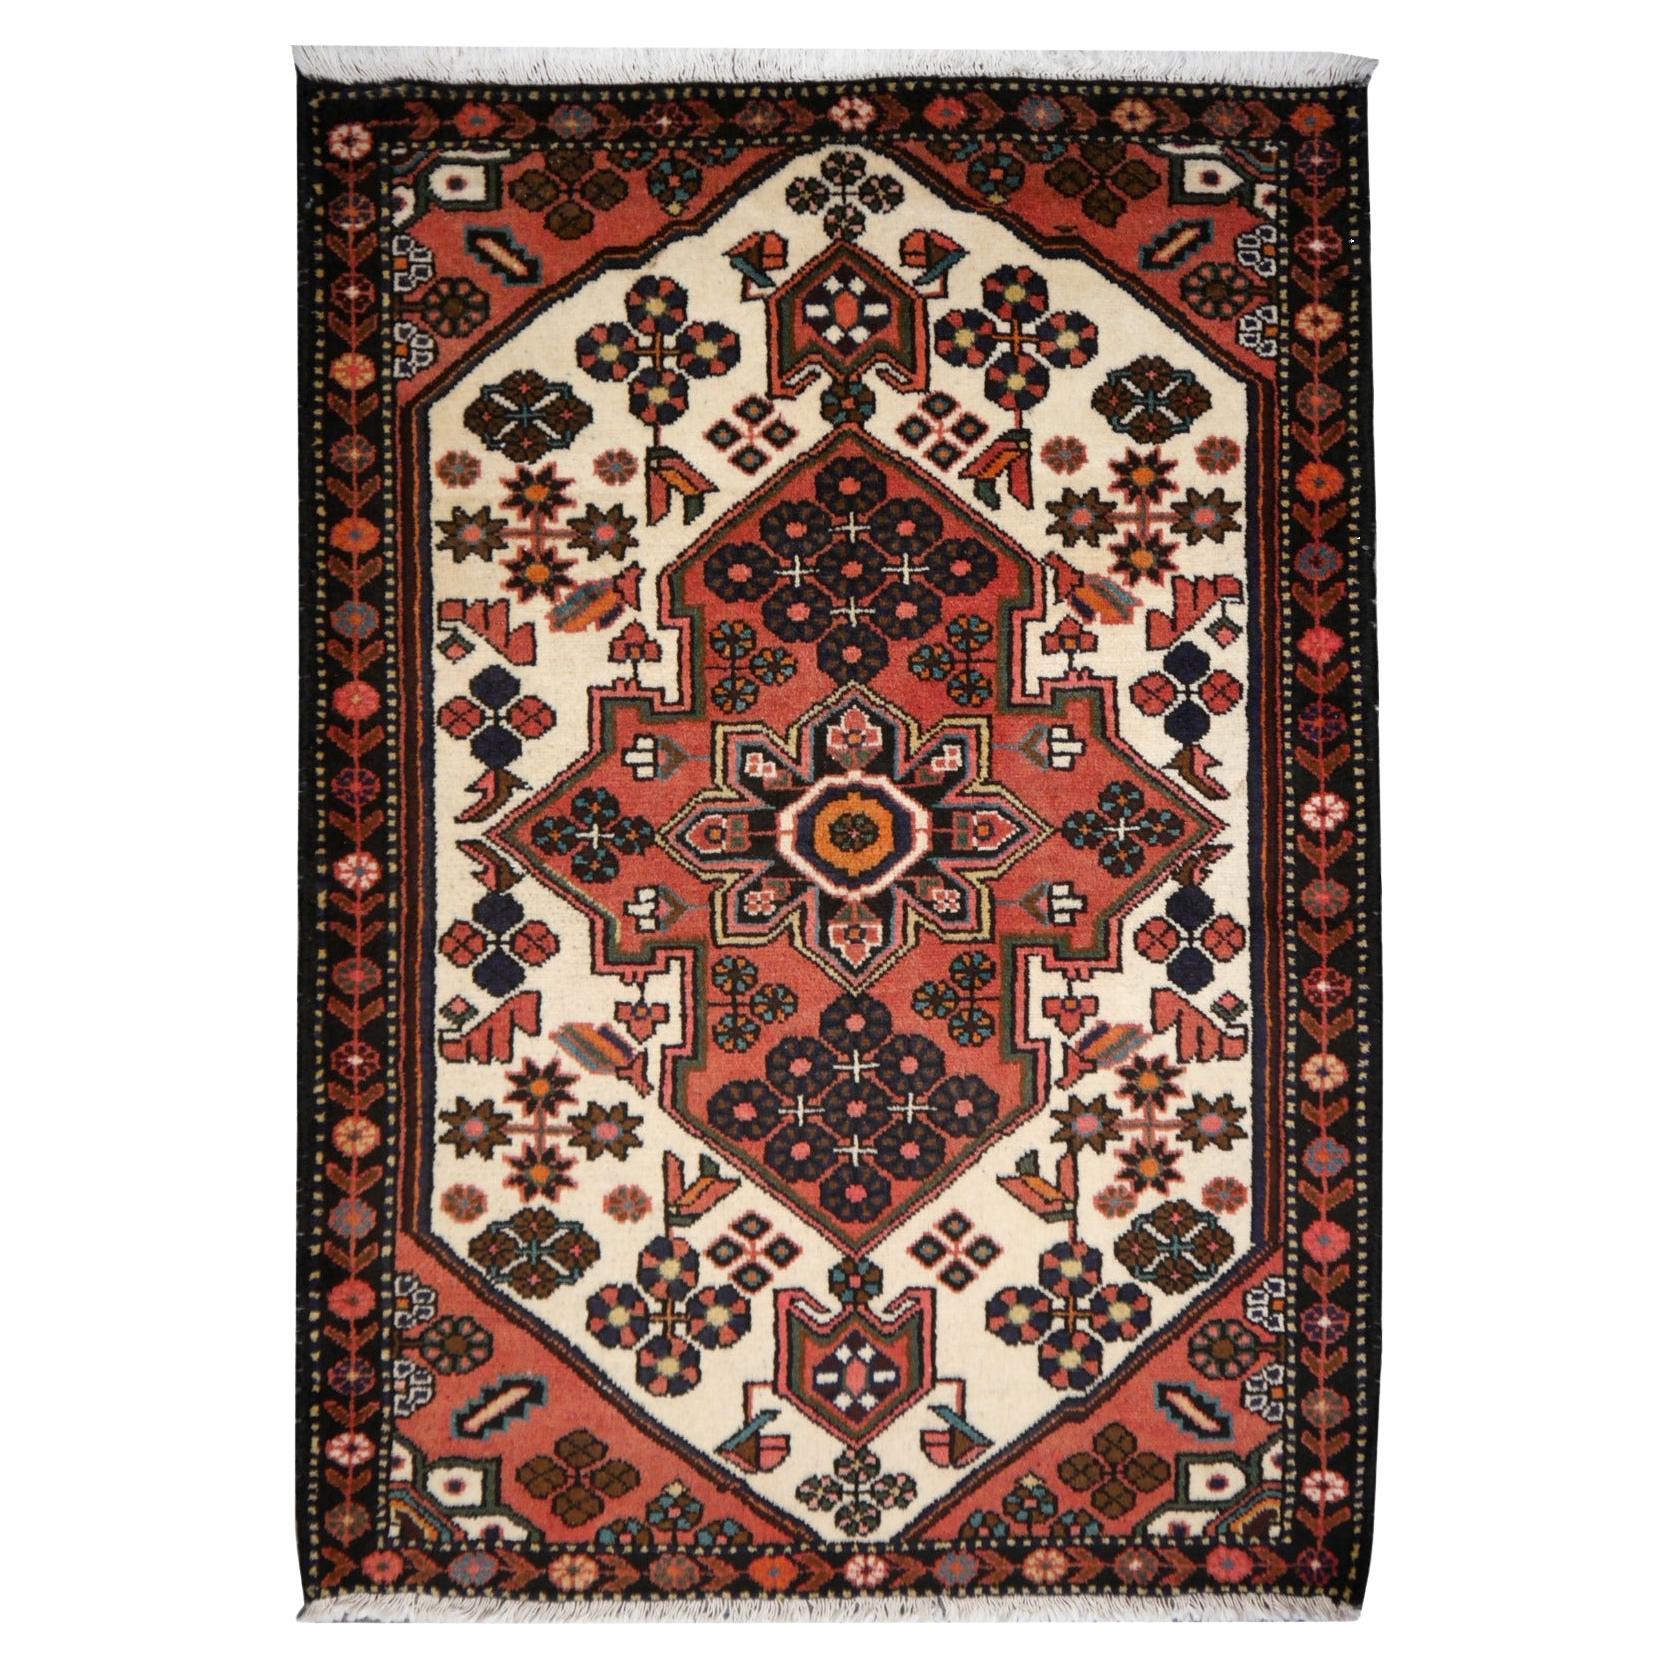 Are silk rugs durable?